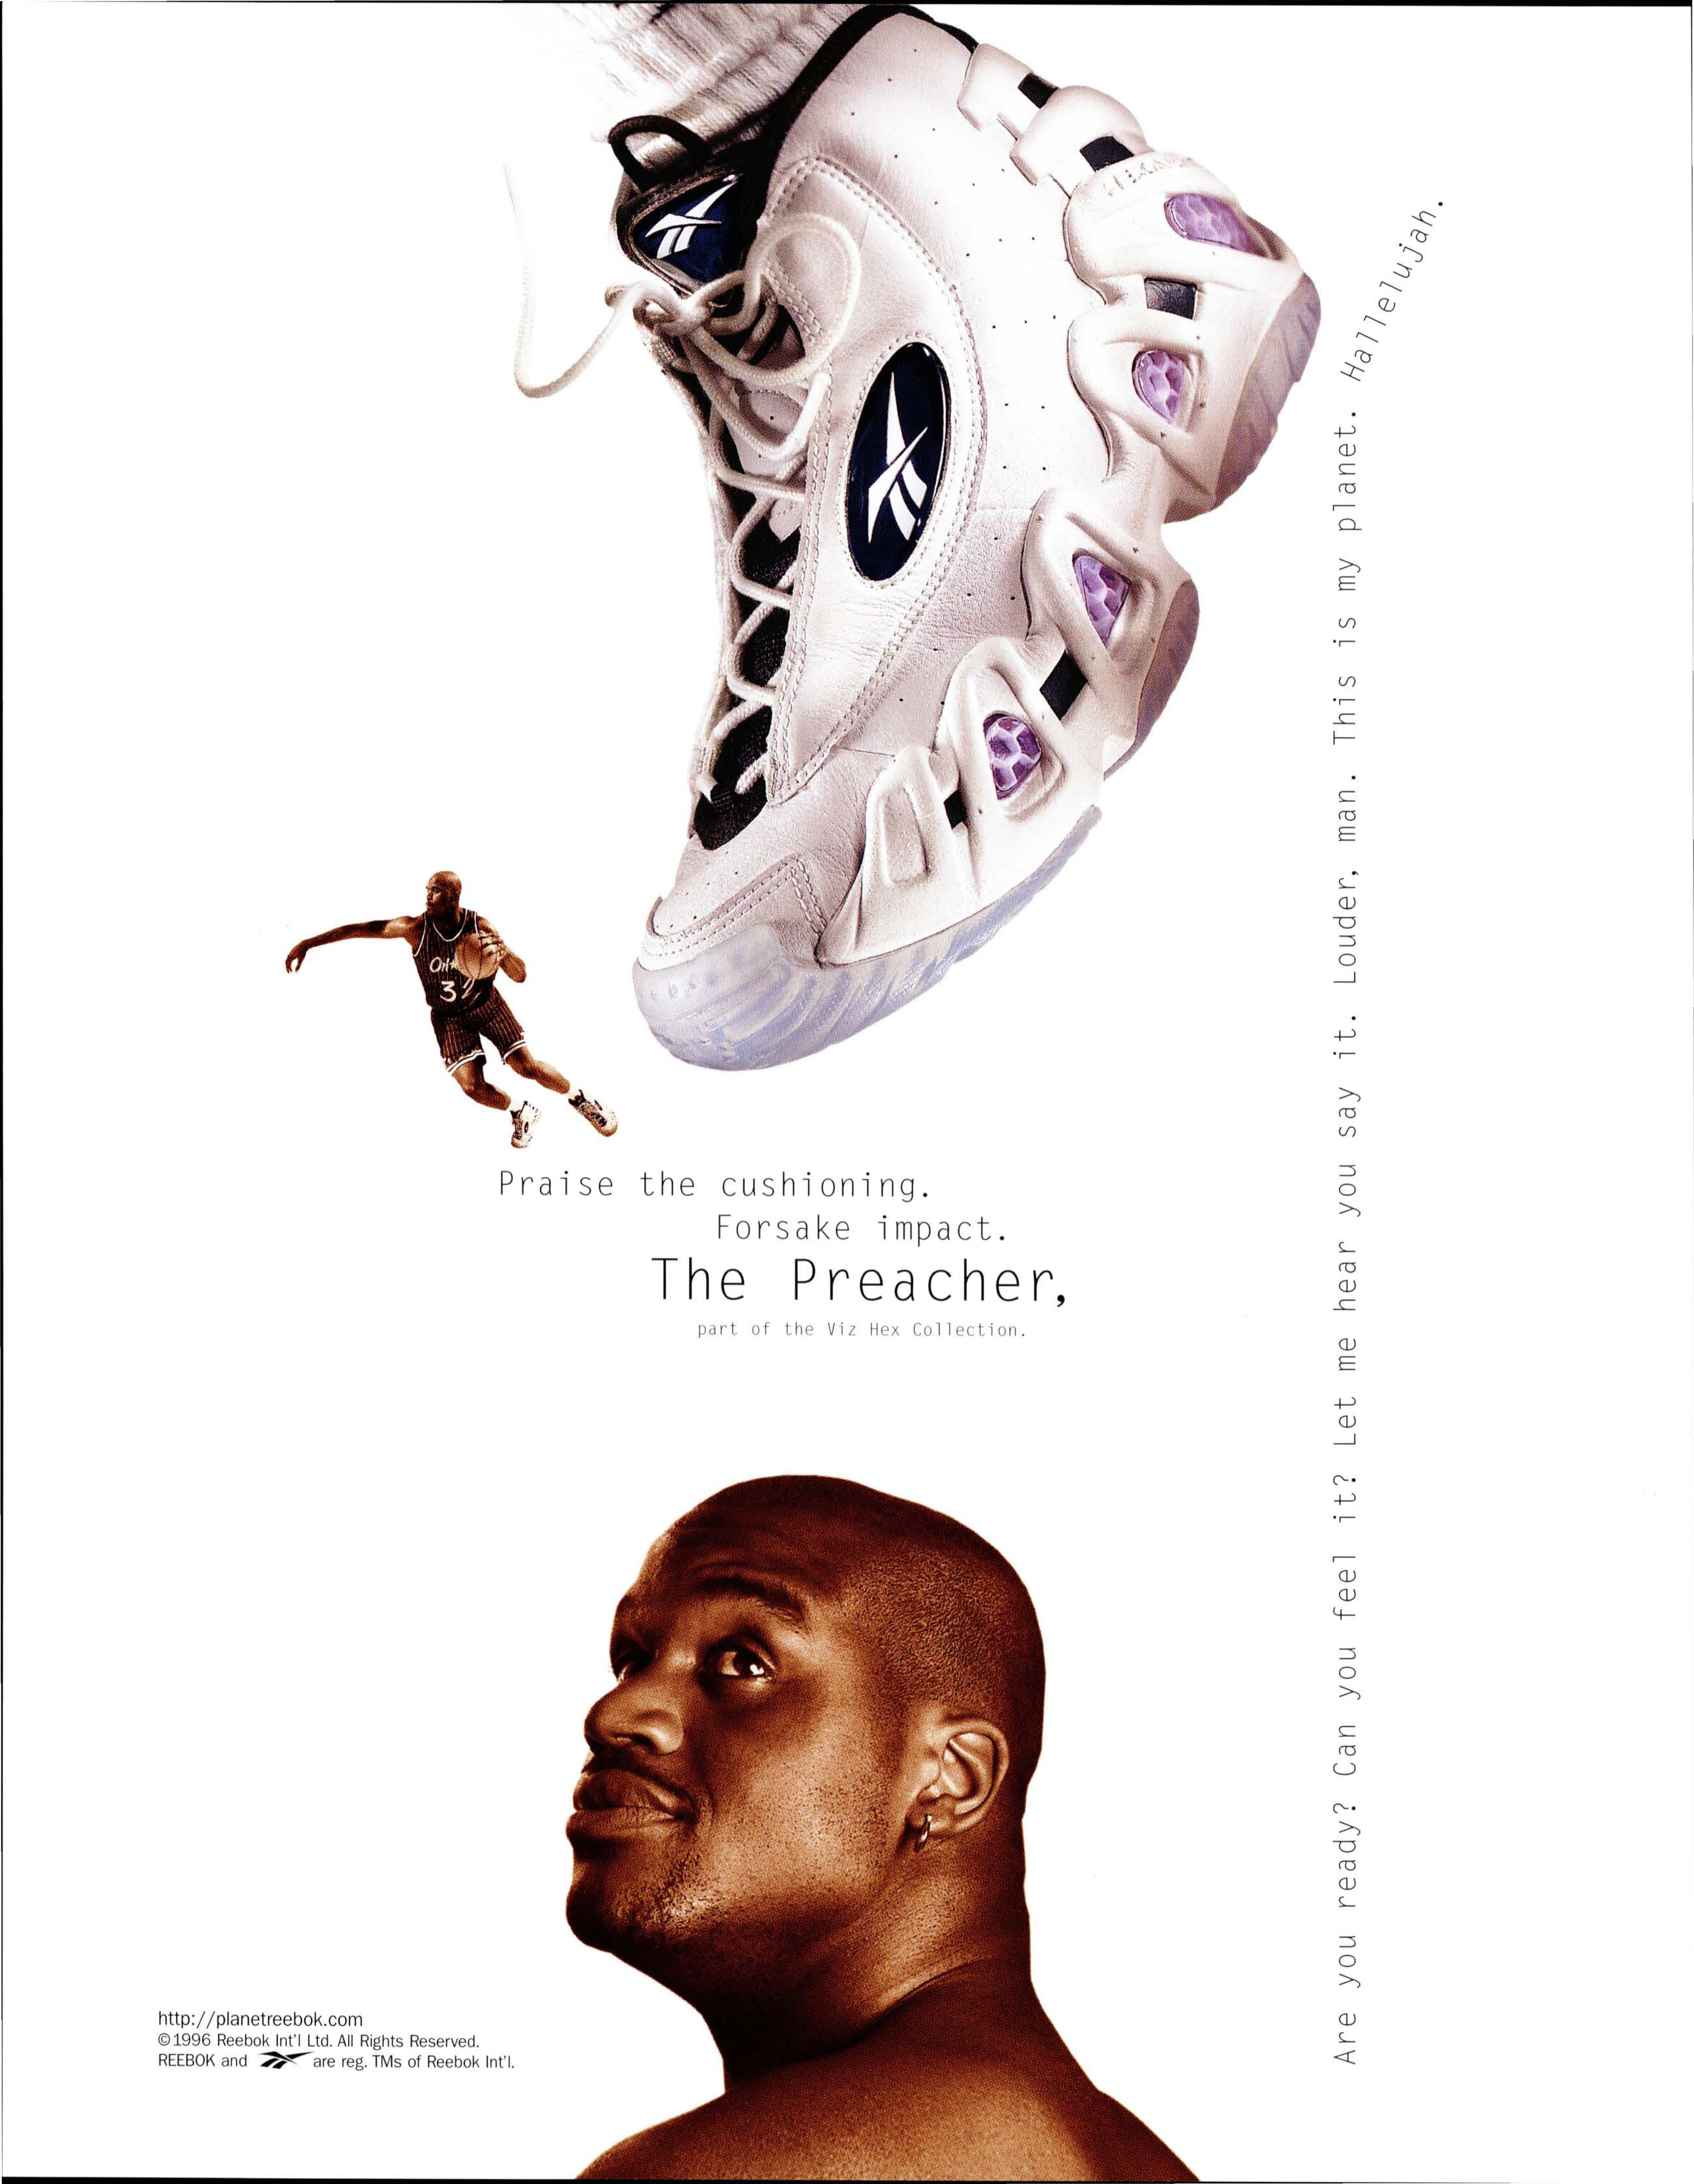 Do any NBA players wear Reebok? Shaquille O'Neal, Allen Iverson